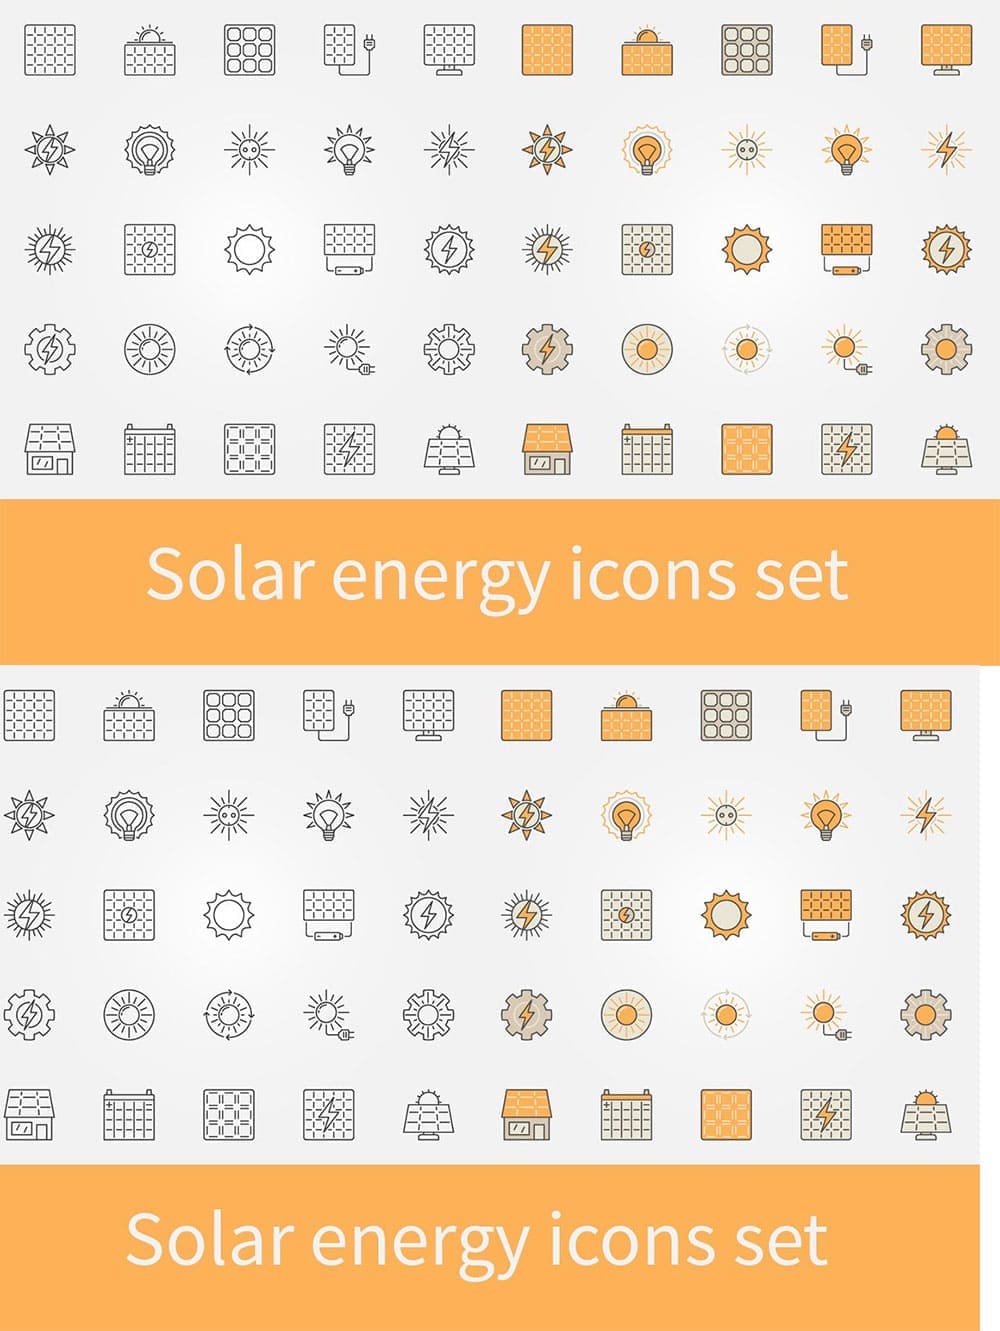 Solar energy icons set, picture for pinterest.